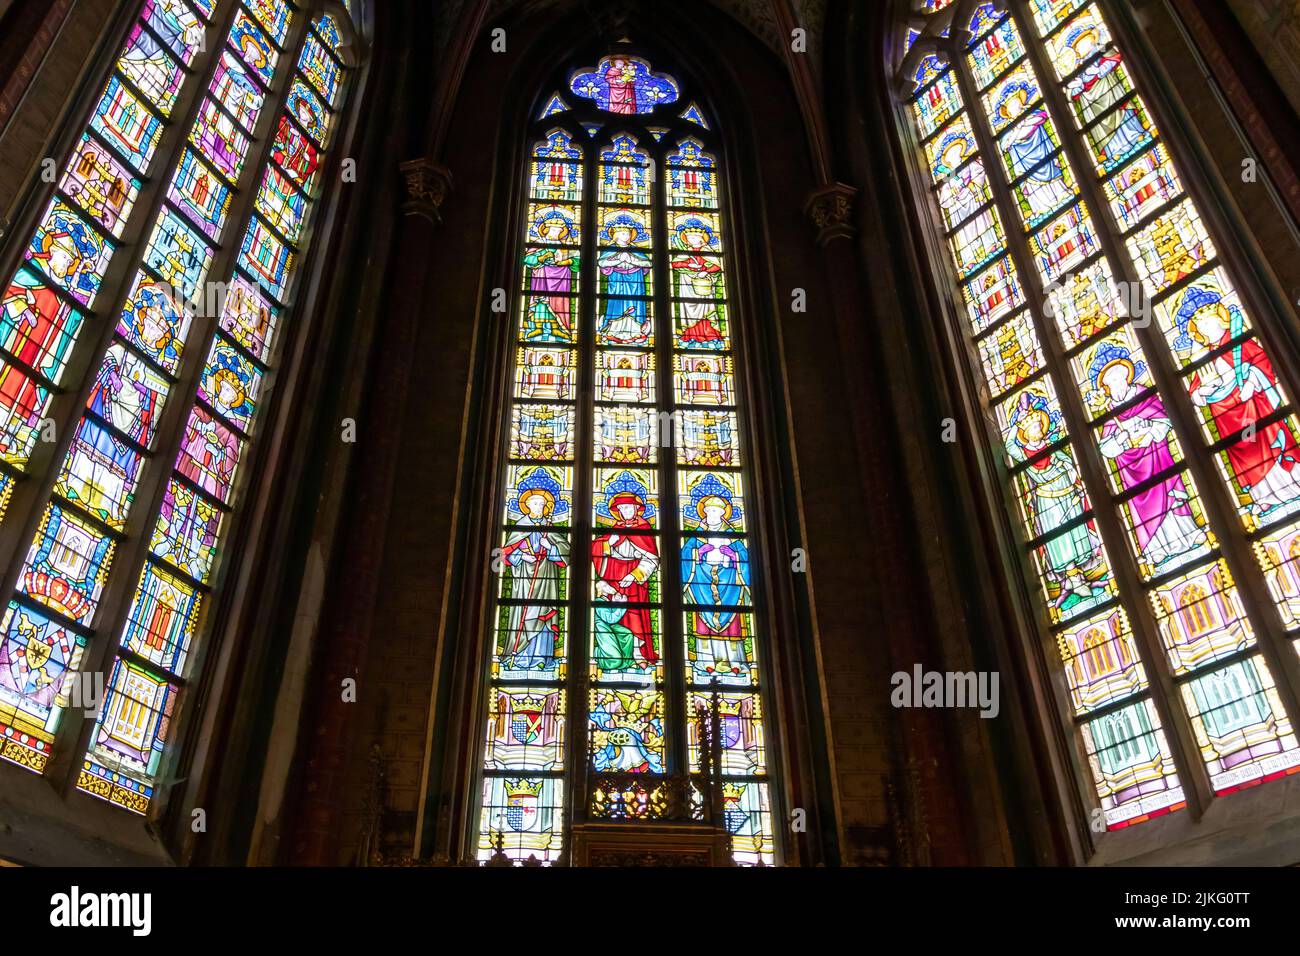 Ghent, Belgium - July 13, 2018: The stained glass windows, the Saint Michael's Church interior Stock Photo